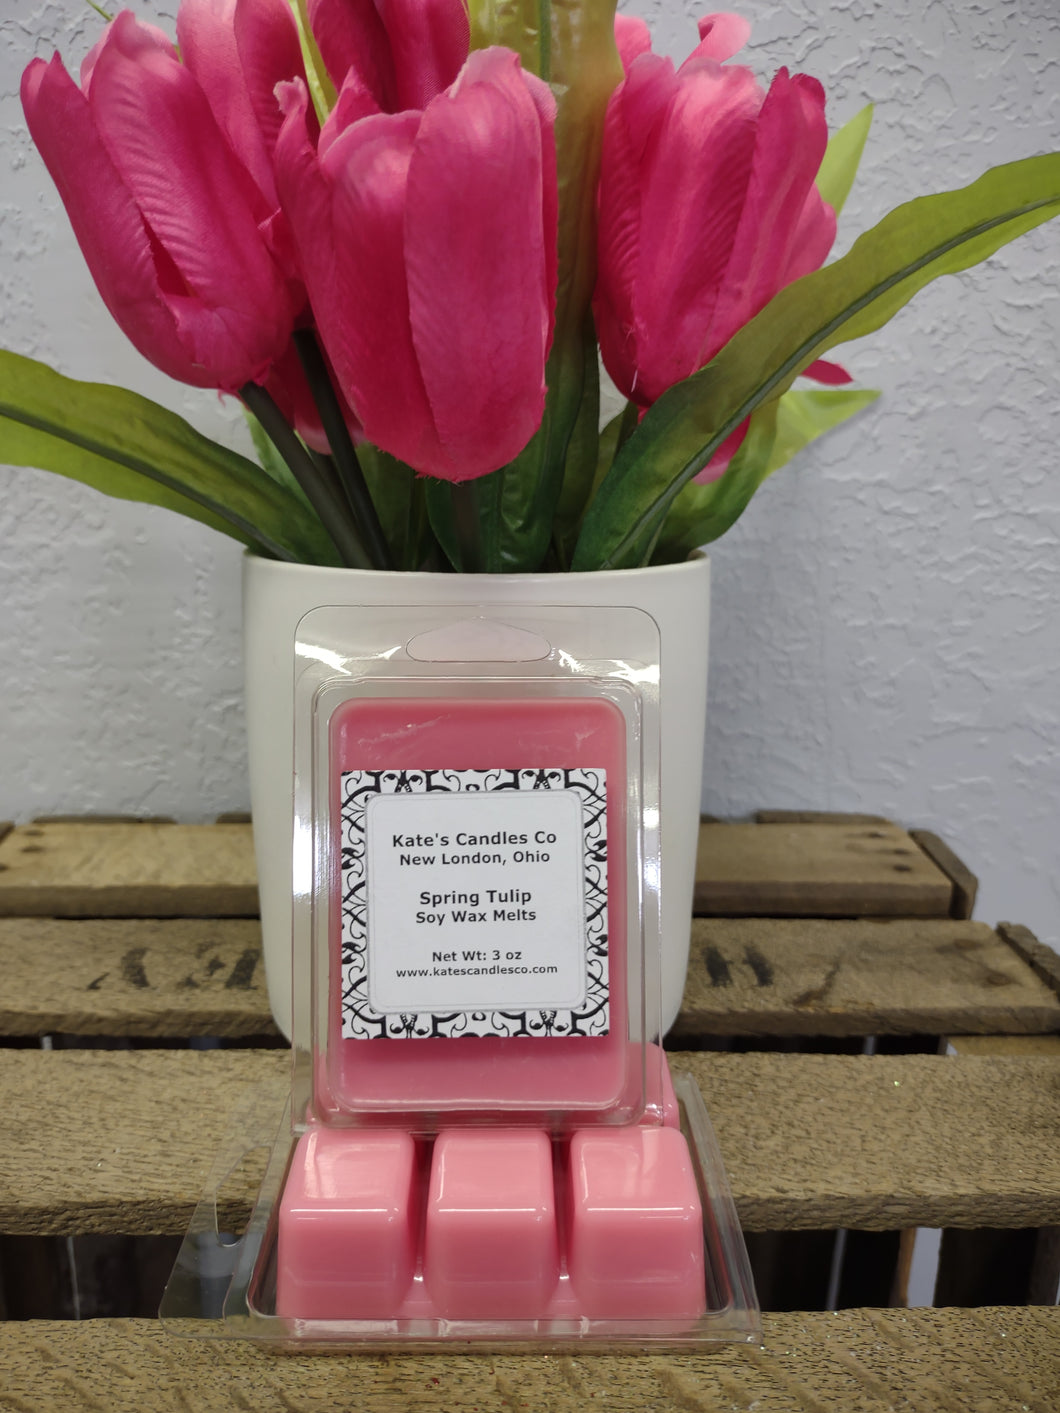 Spring Tulip Soy Wax Melts - Kate's Candles Co.